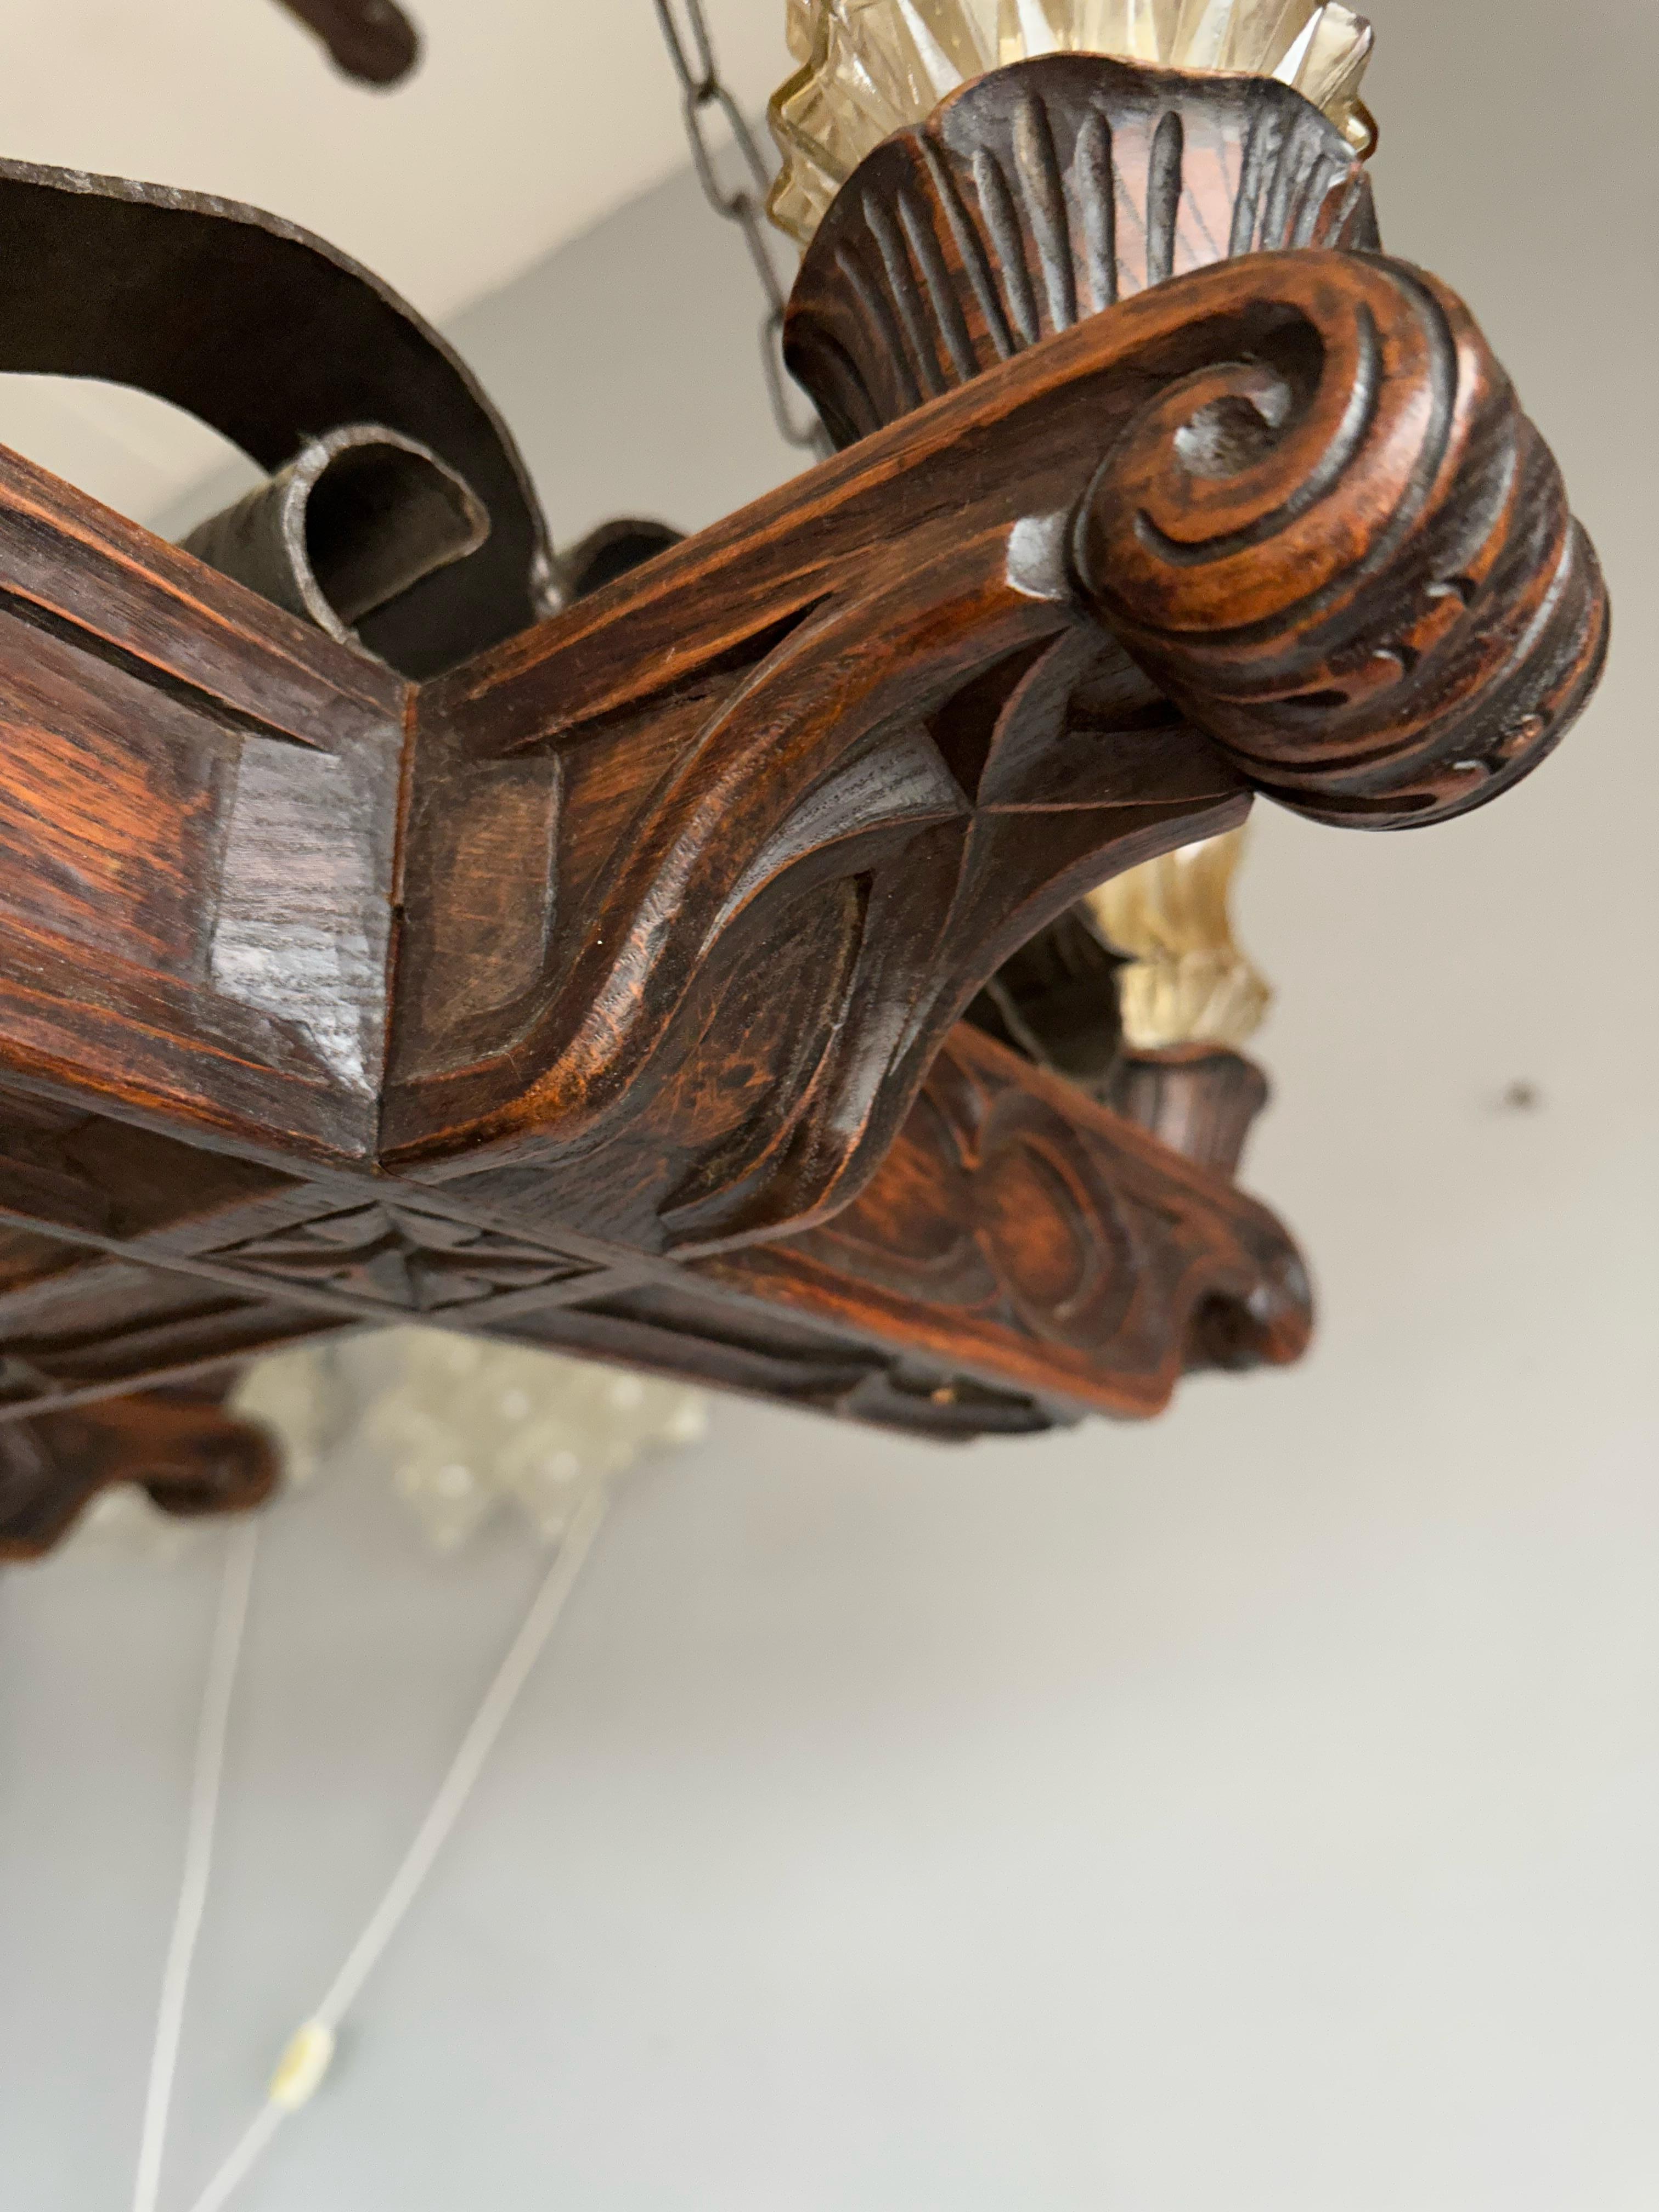 Blackened Rare Handcrafted Oak and Iron Gothic Revival Church Pendant Light / Chandelier For Sale